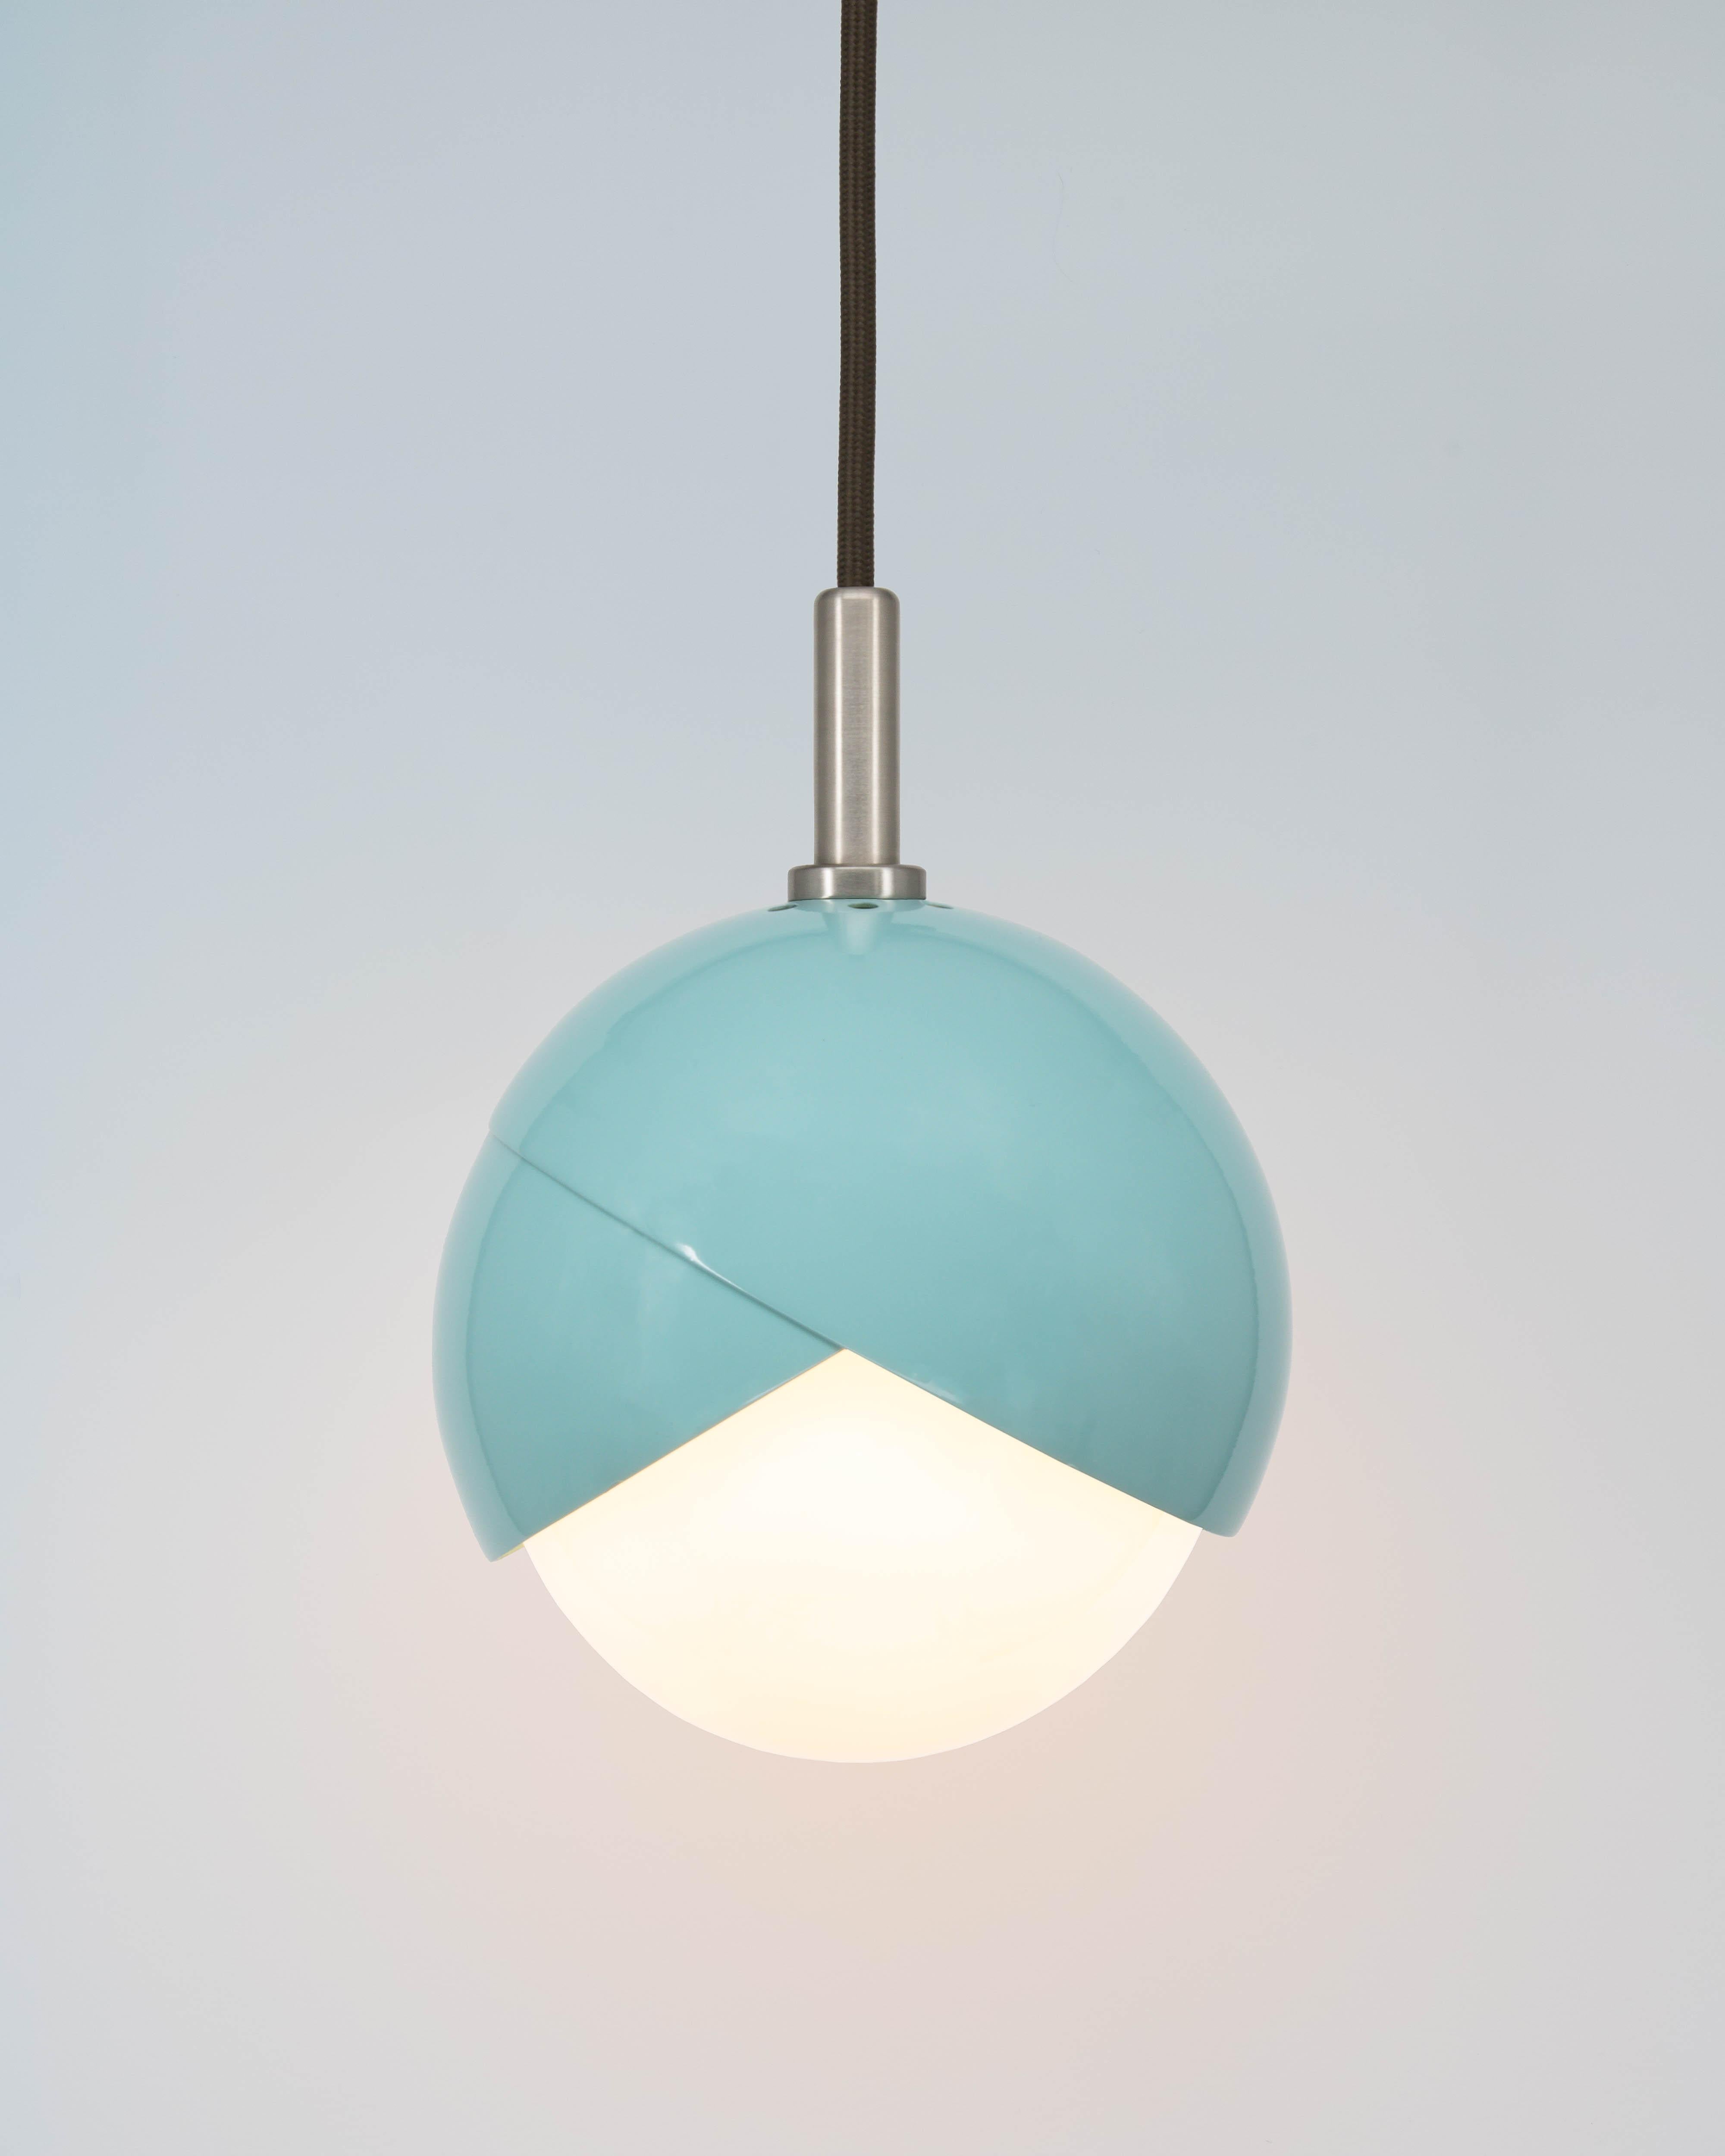 The Benedict™ color series styles our most versatile pendant light in a wide range of colorful configurations, both bright and subdued, sure to fit the mood of any project. Like all Trella™ products, our hand made lights are highly customizable, and